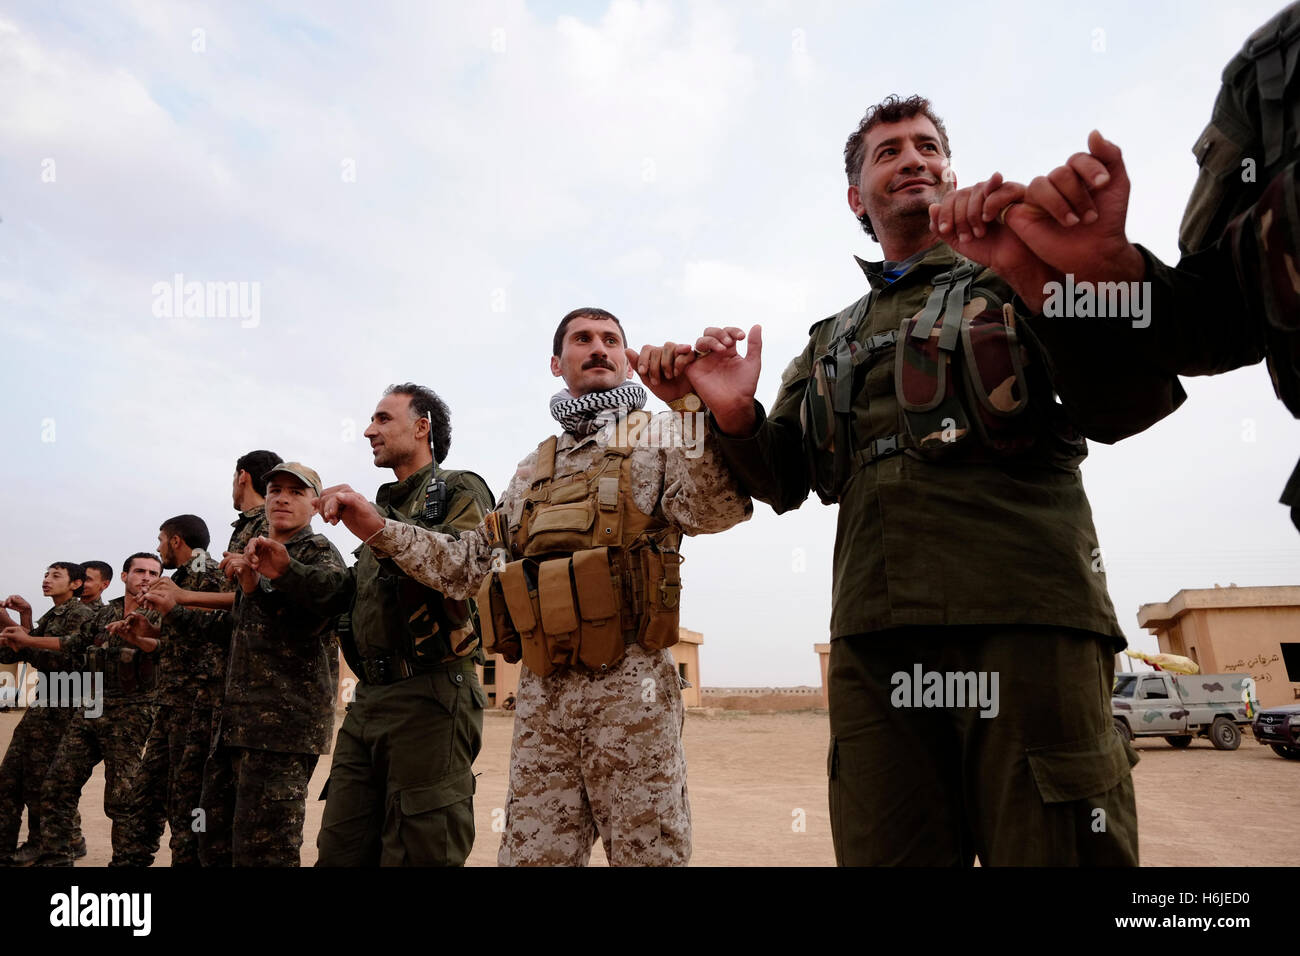 Kurdish fighters of the People's Protection Units YPG dancing traditional Kurdish dance in a military recruitment ceremony in Al Hasakah or Hassakeh district in northern Syria Stock Photo